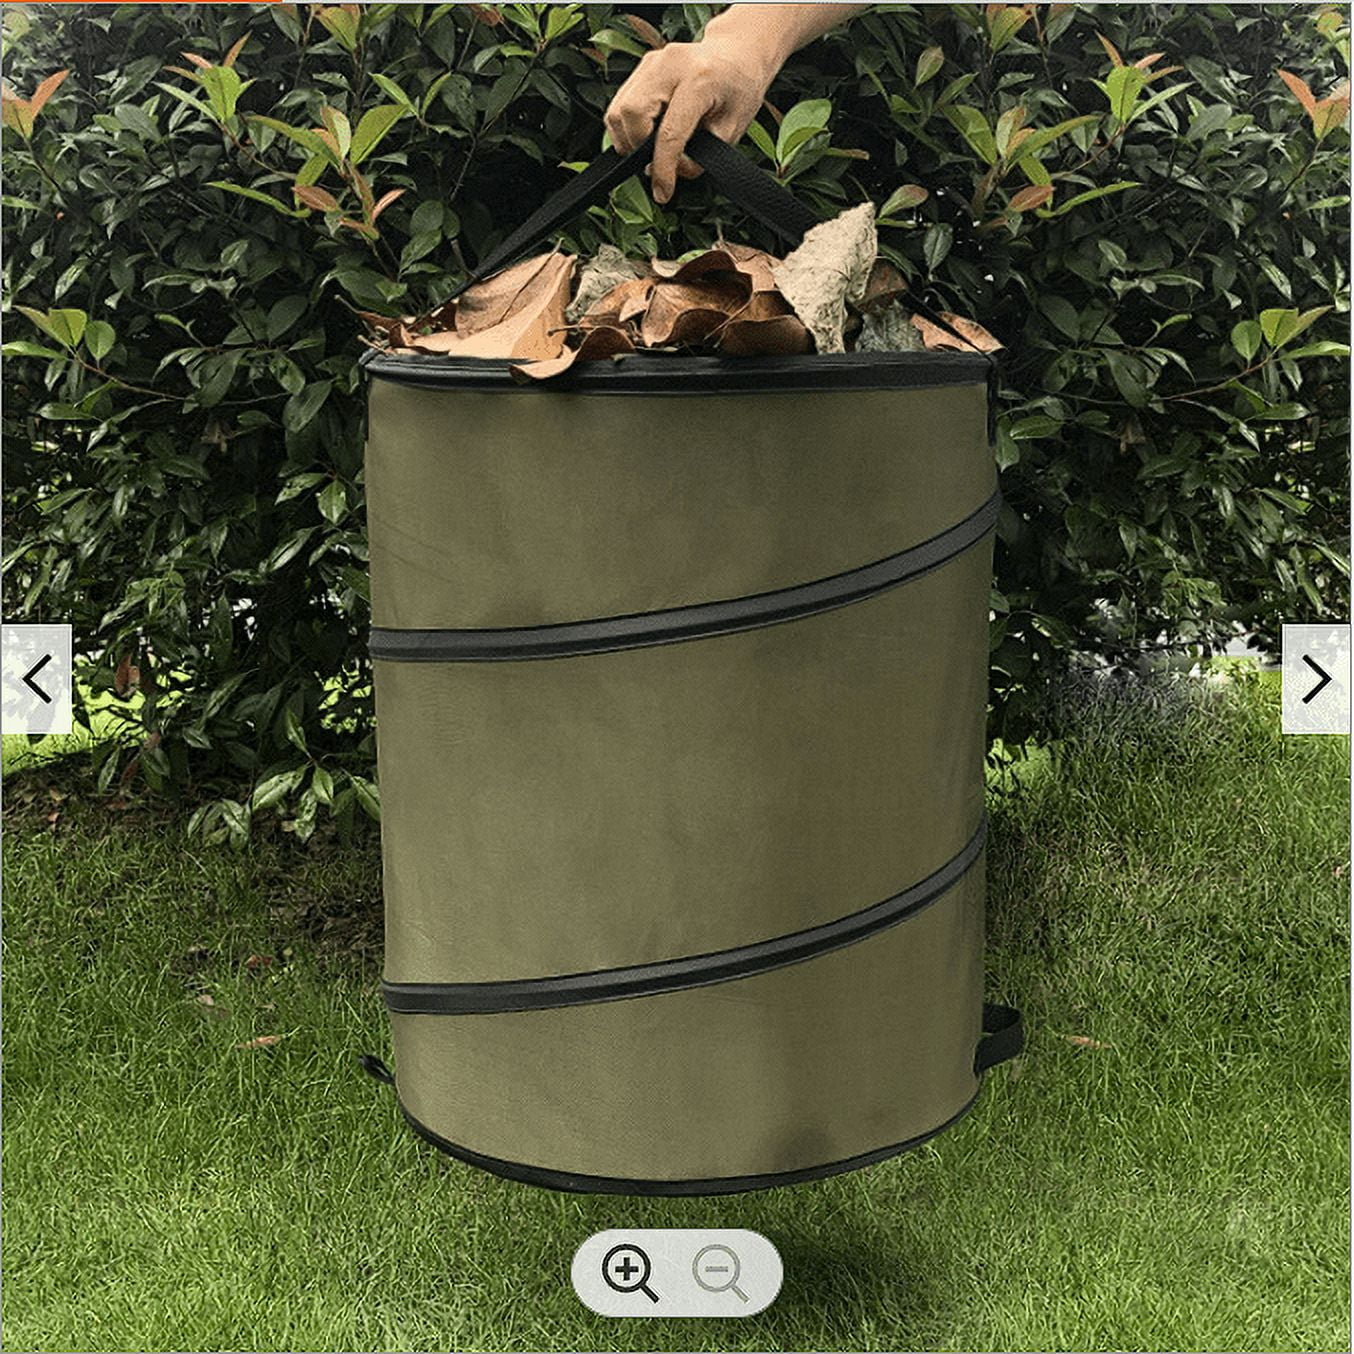 Cubilan 15.75 in. W x 16 in. D x 31.6 in. H, Outdoor 30 Gallon Durable Garbage Can Trash Waste Bin Container Trash Can Storage, Gray